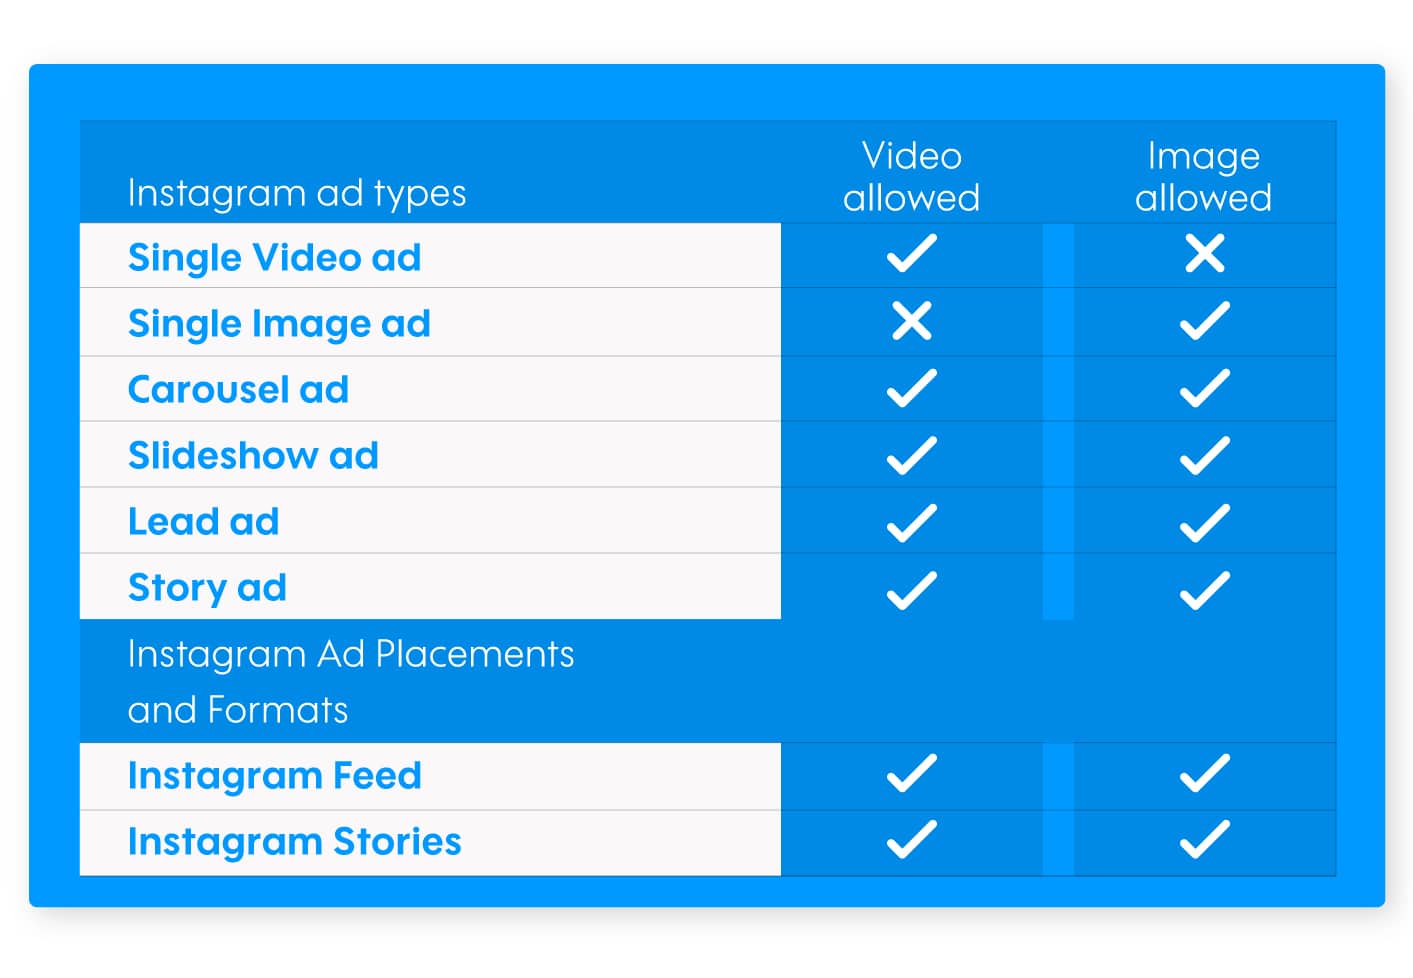 Instagram ad types and placements